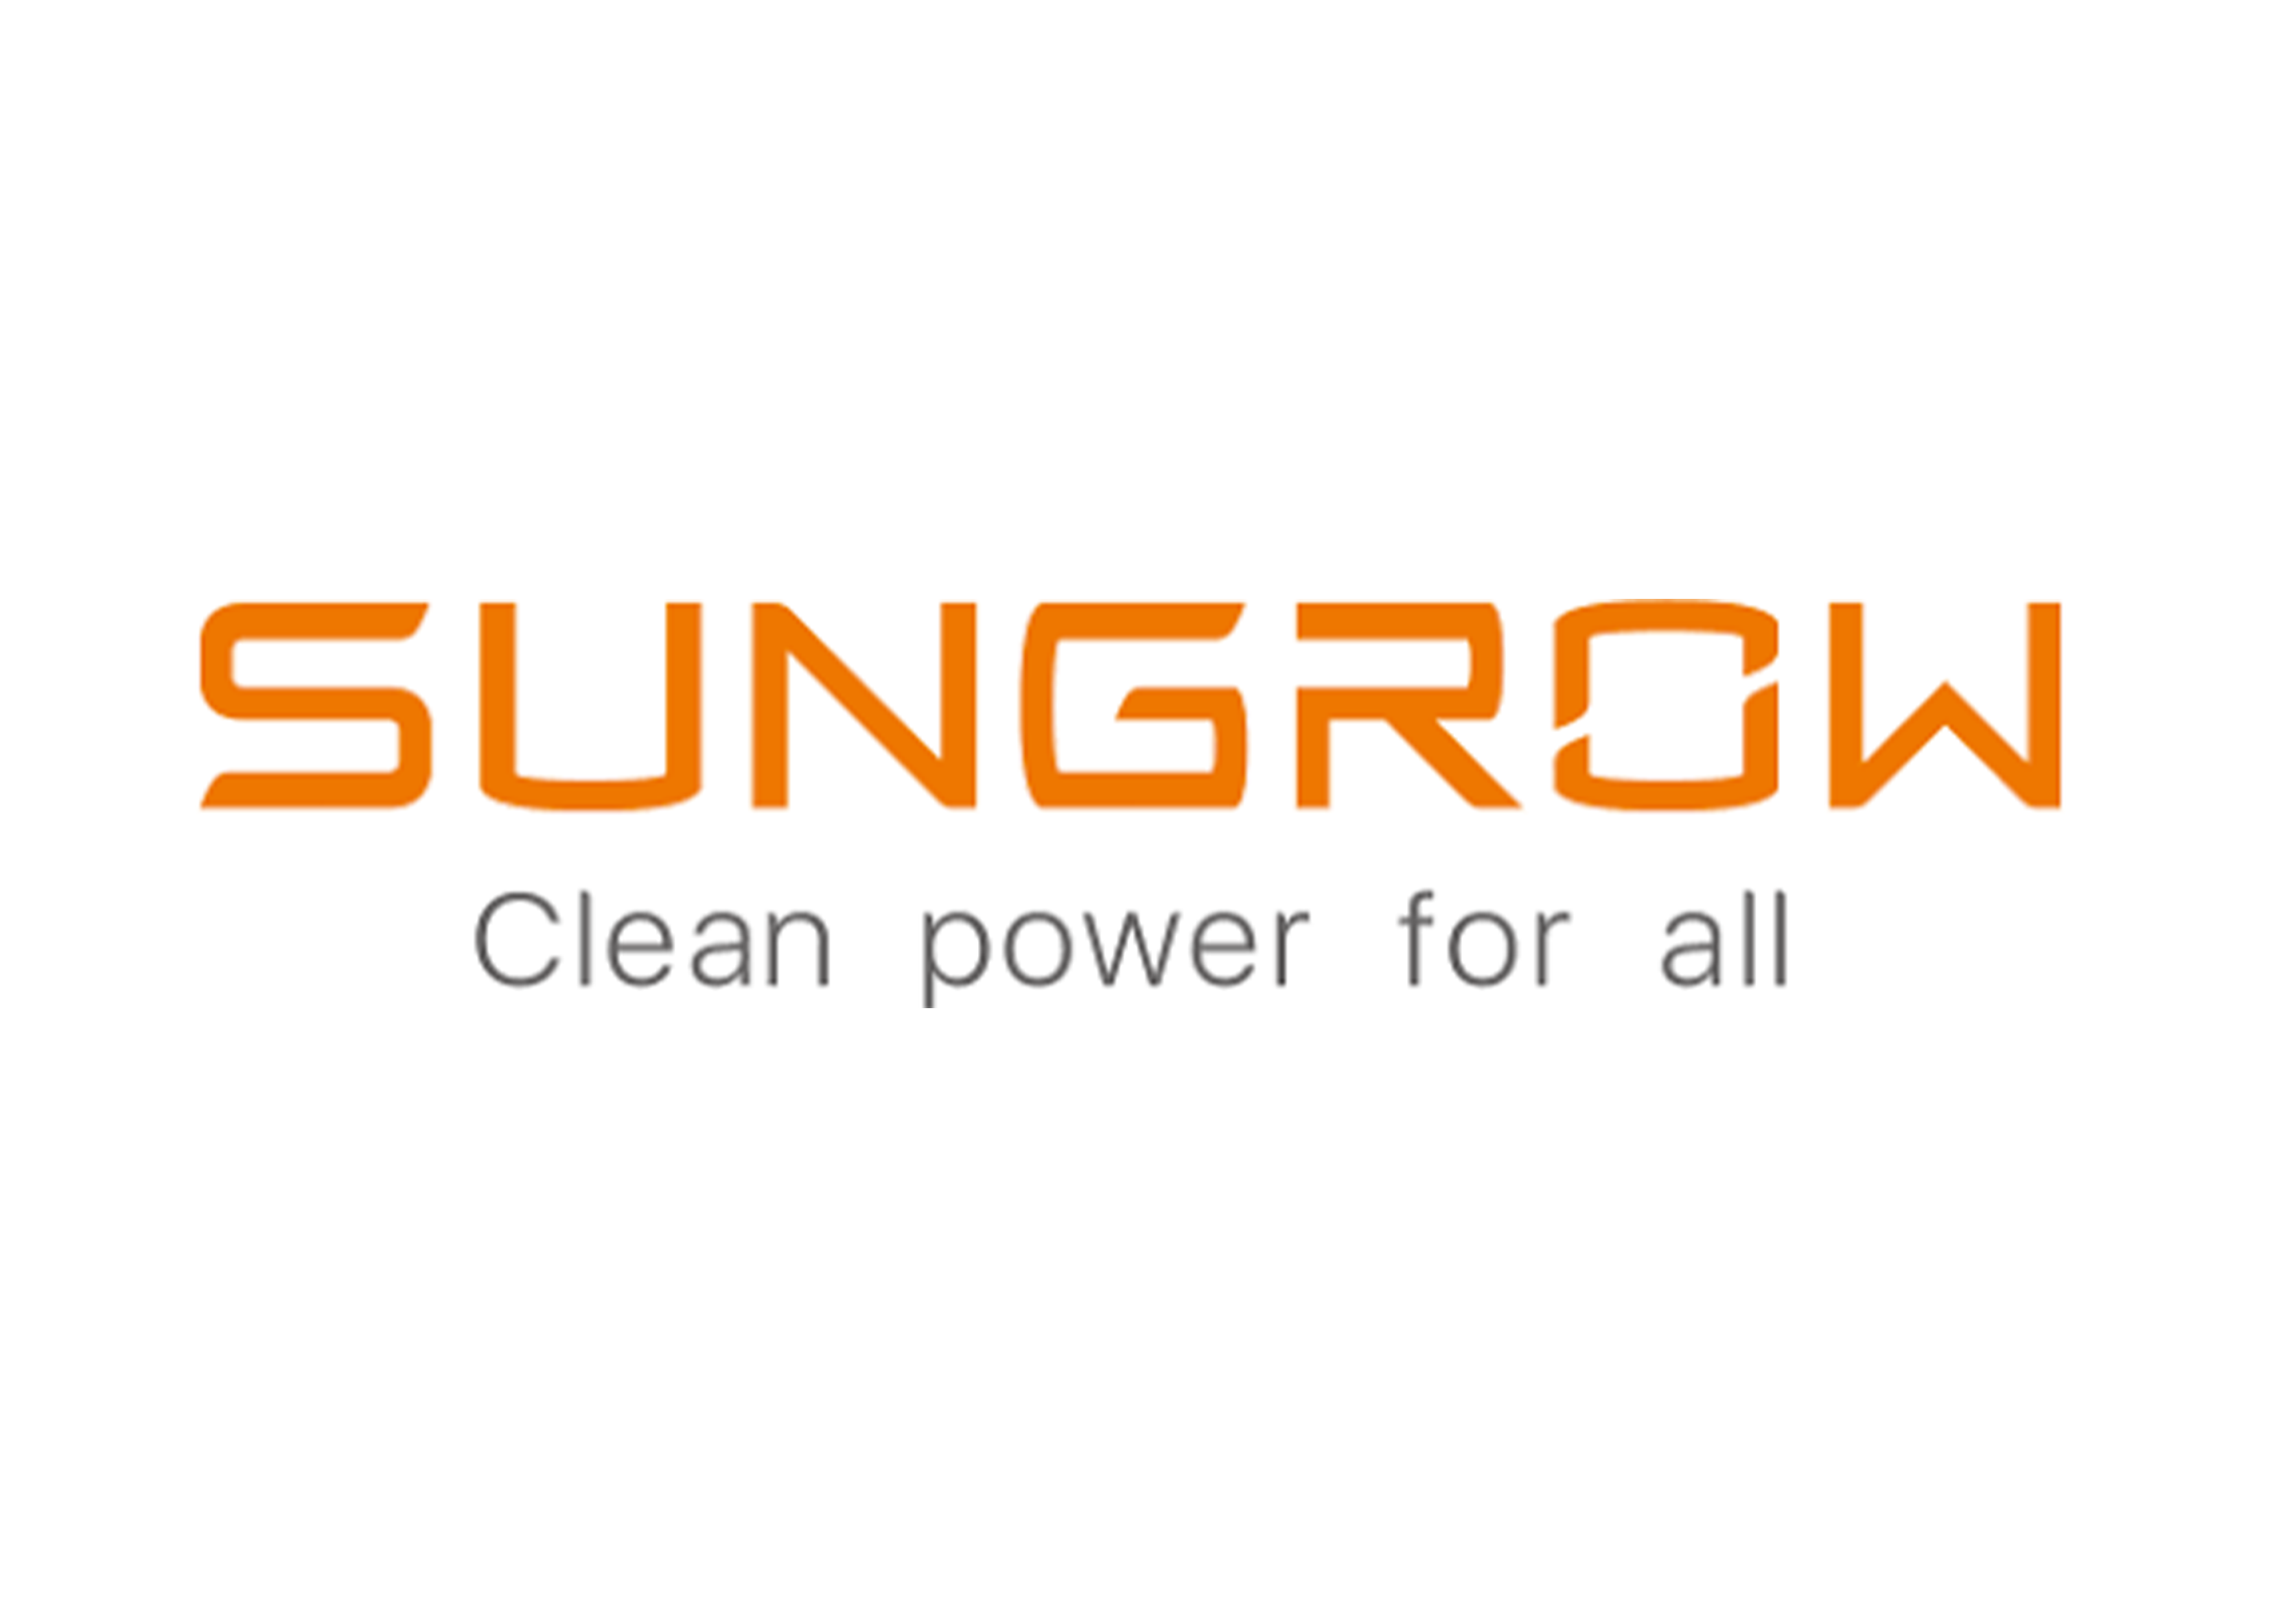 limitless energy solutions - sungrow